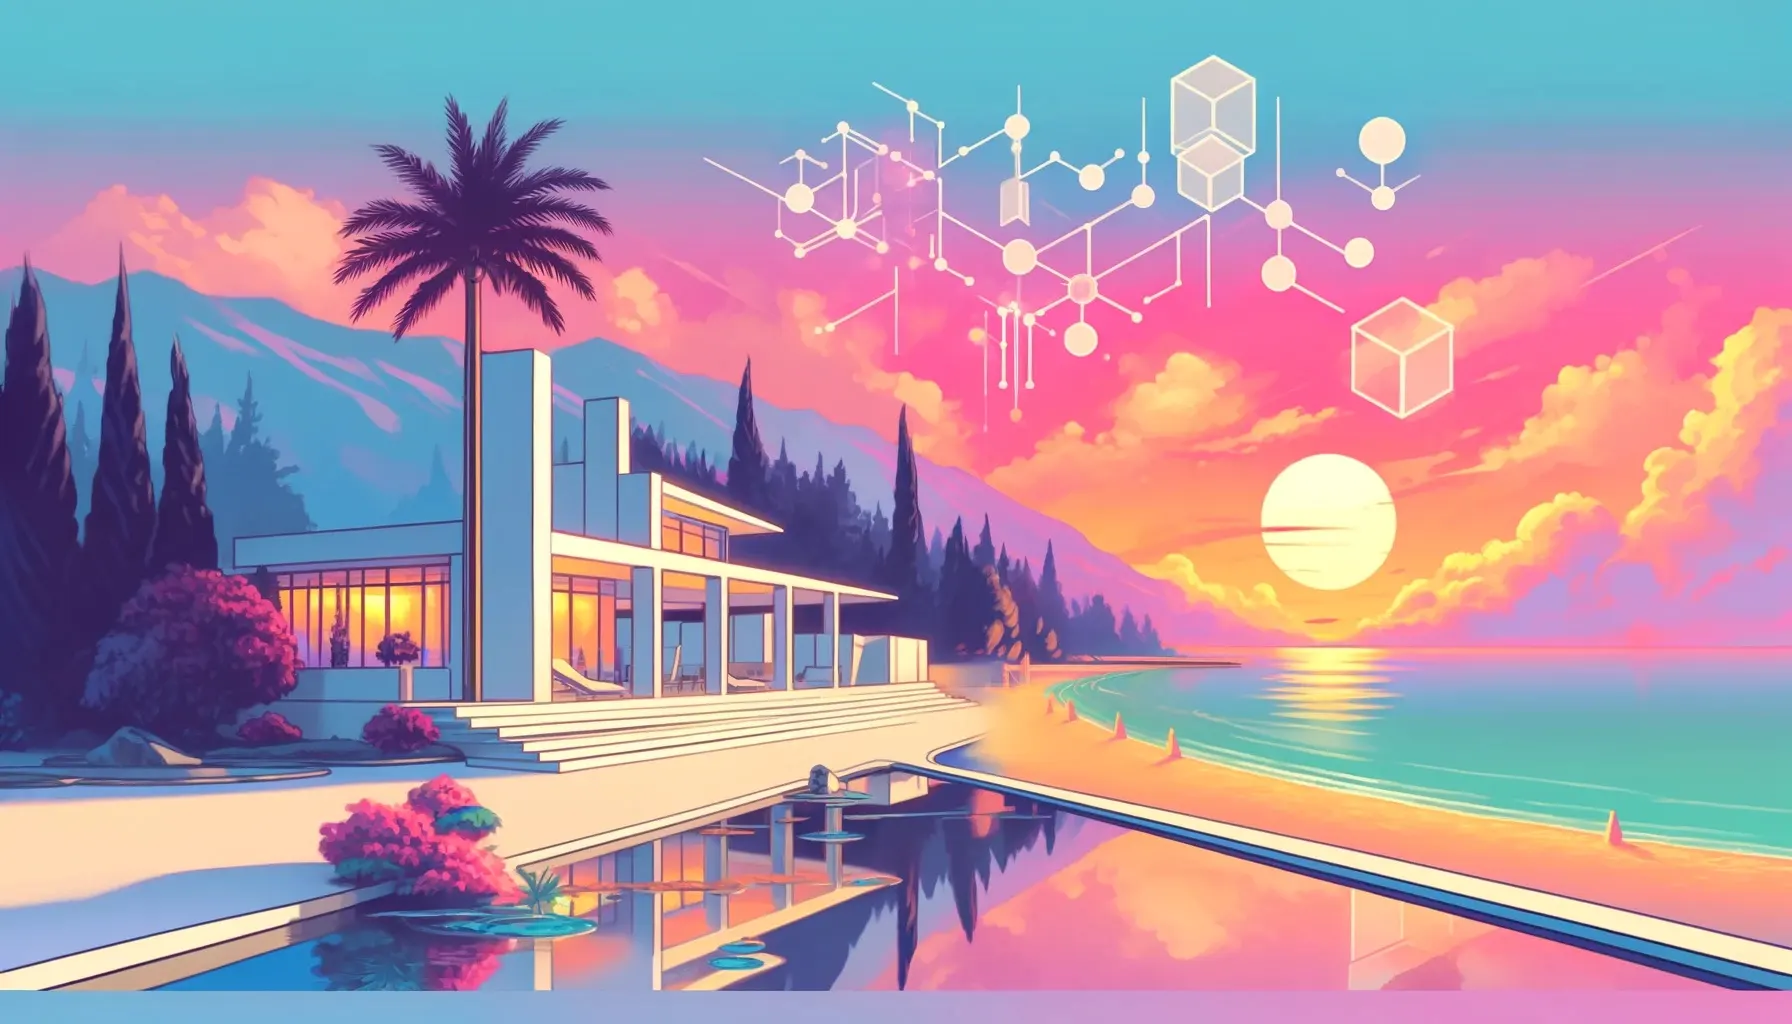 A serene coastal landscape at dusk, where the calm sea meets a technologically advanced house, symbolizing the intersection of leisure and the complex, yet seamless integration of blockchain technology with Zero-Knowledge proofs, embodying the tranquility and potential of secure, private transactions in a decentralized world.